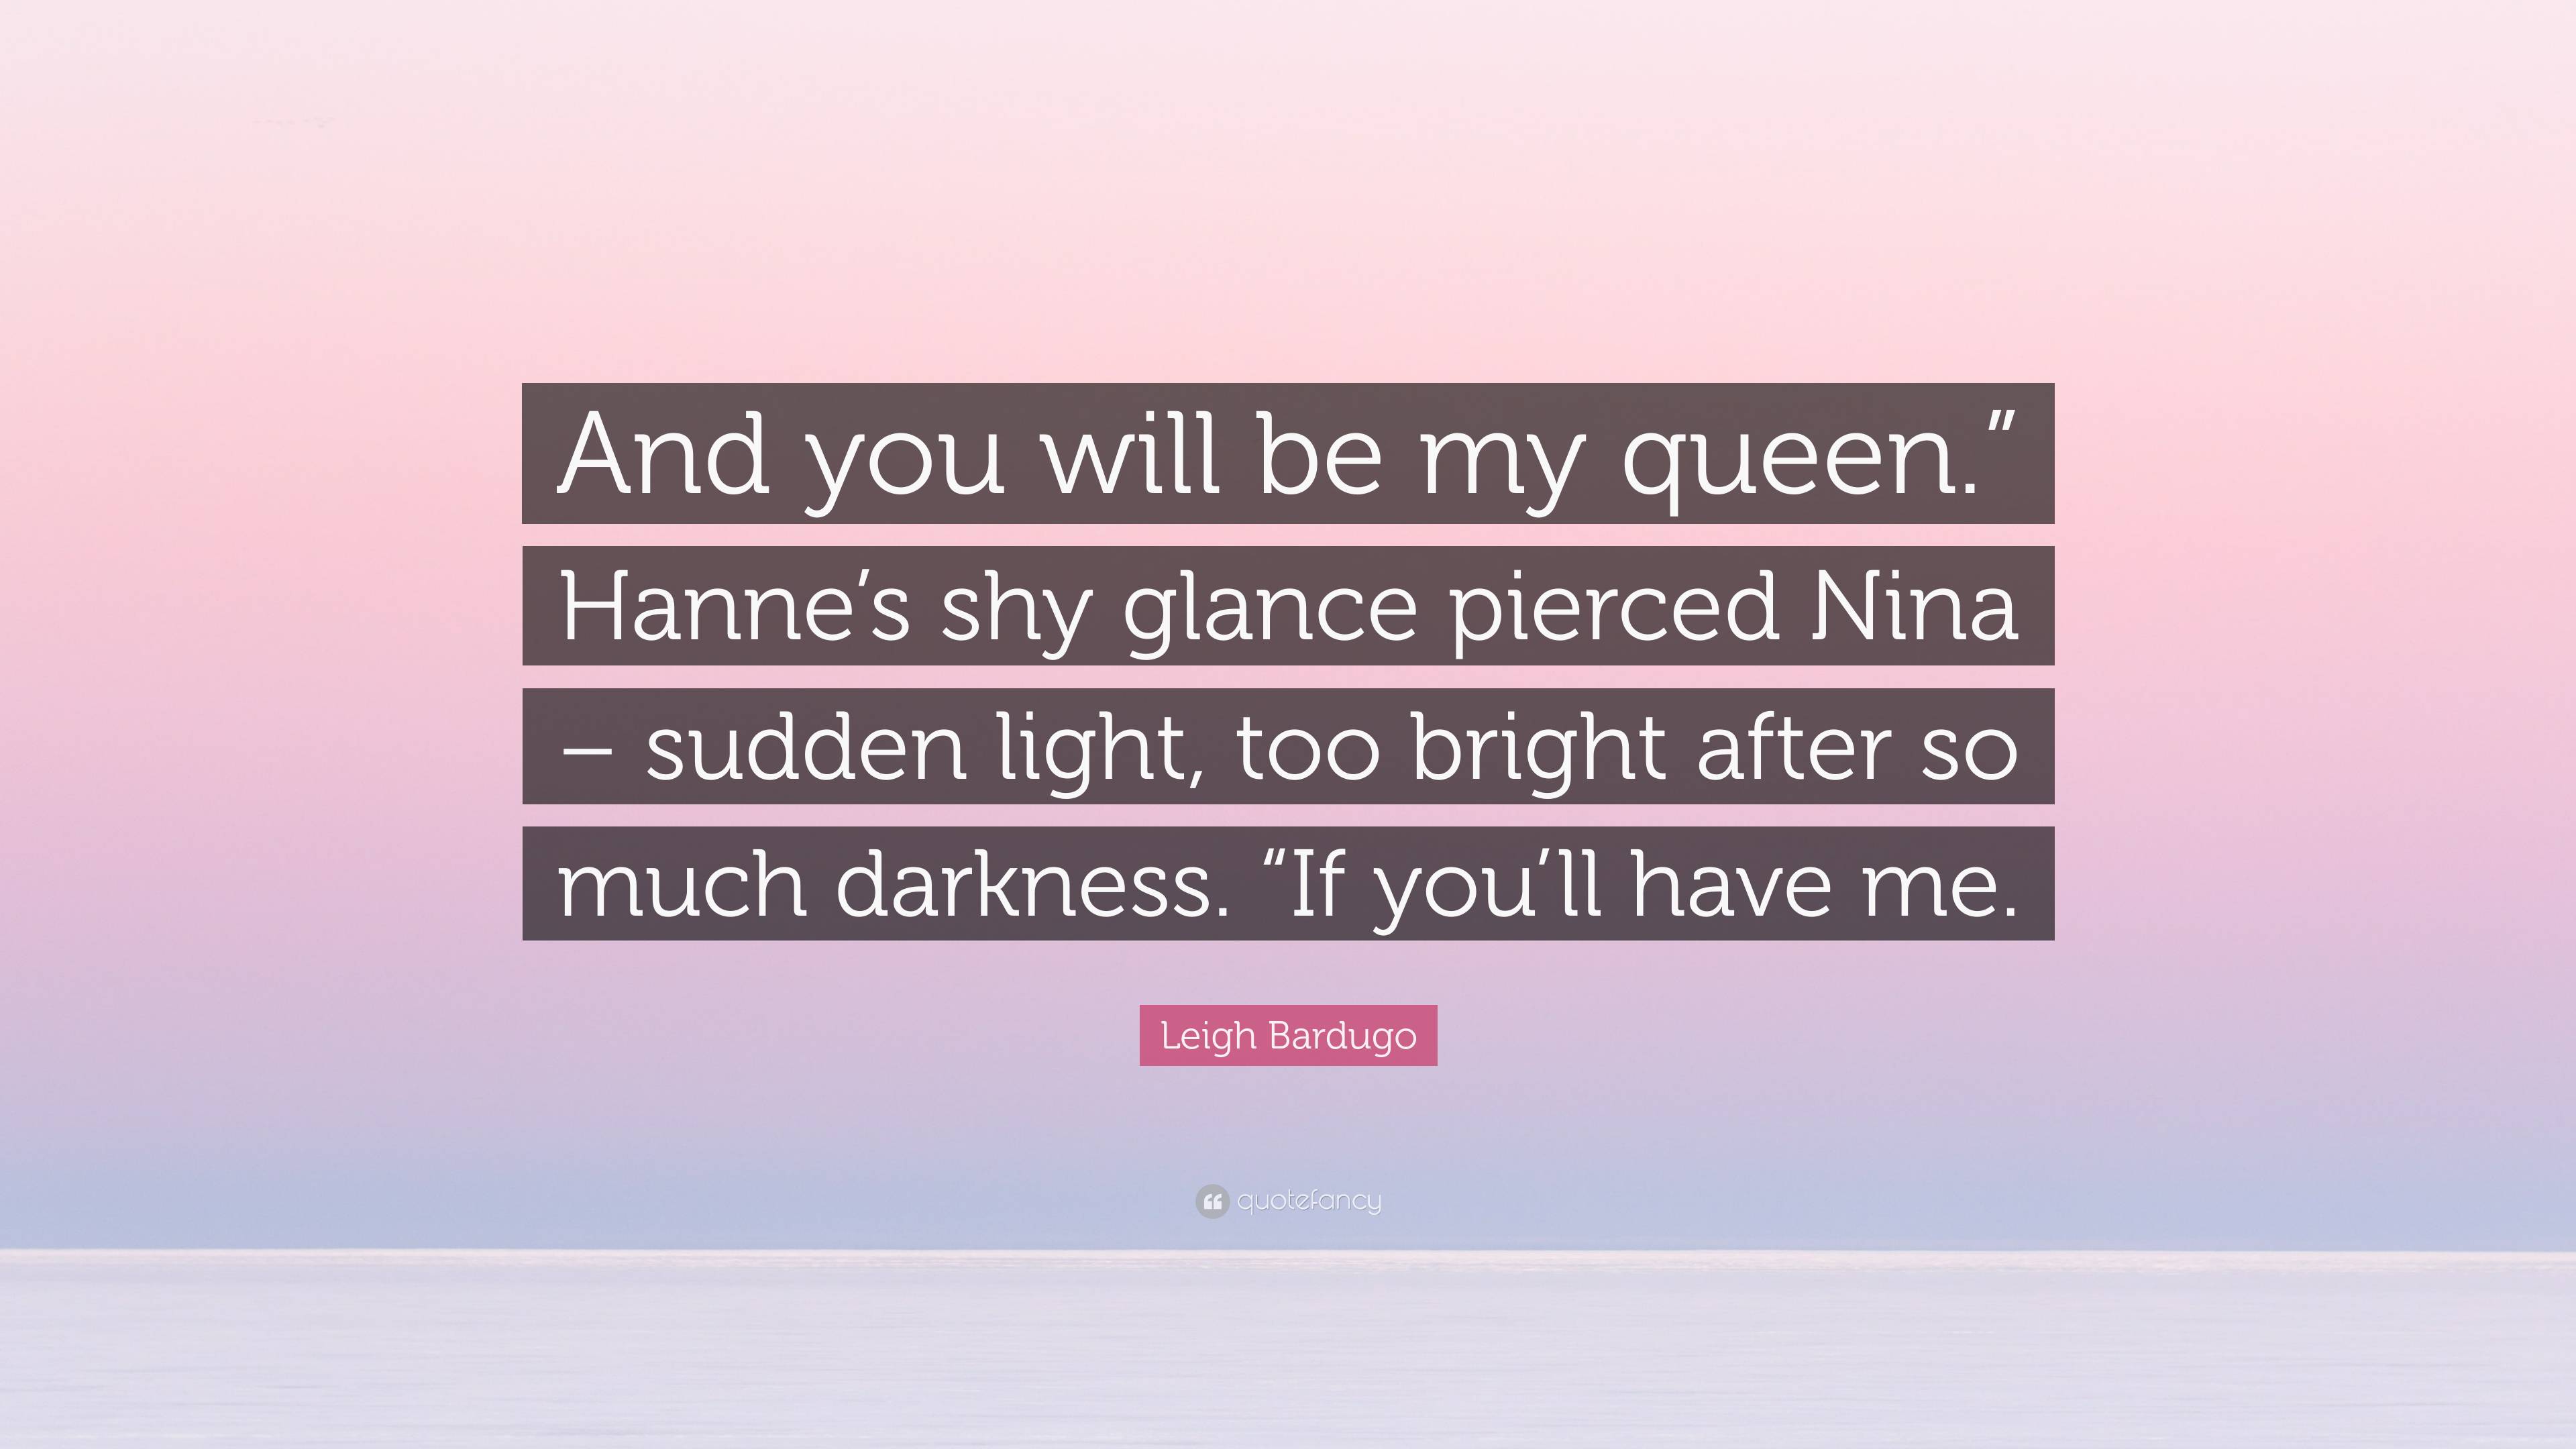 Leigh Bardugo Quote: “And you will be my queen.” Hanne's shy